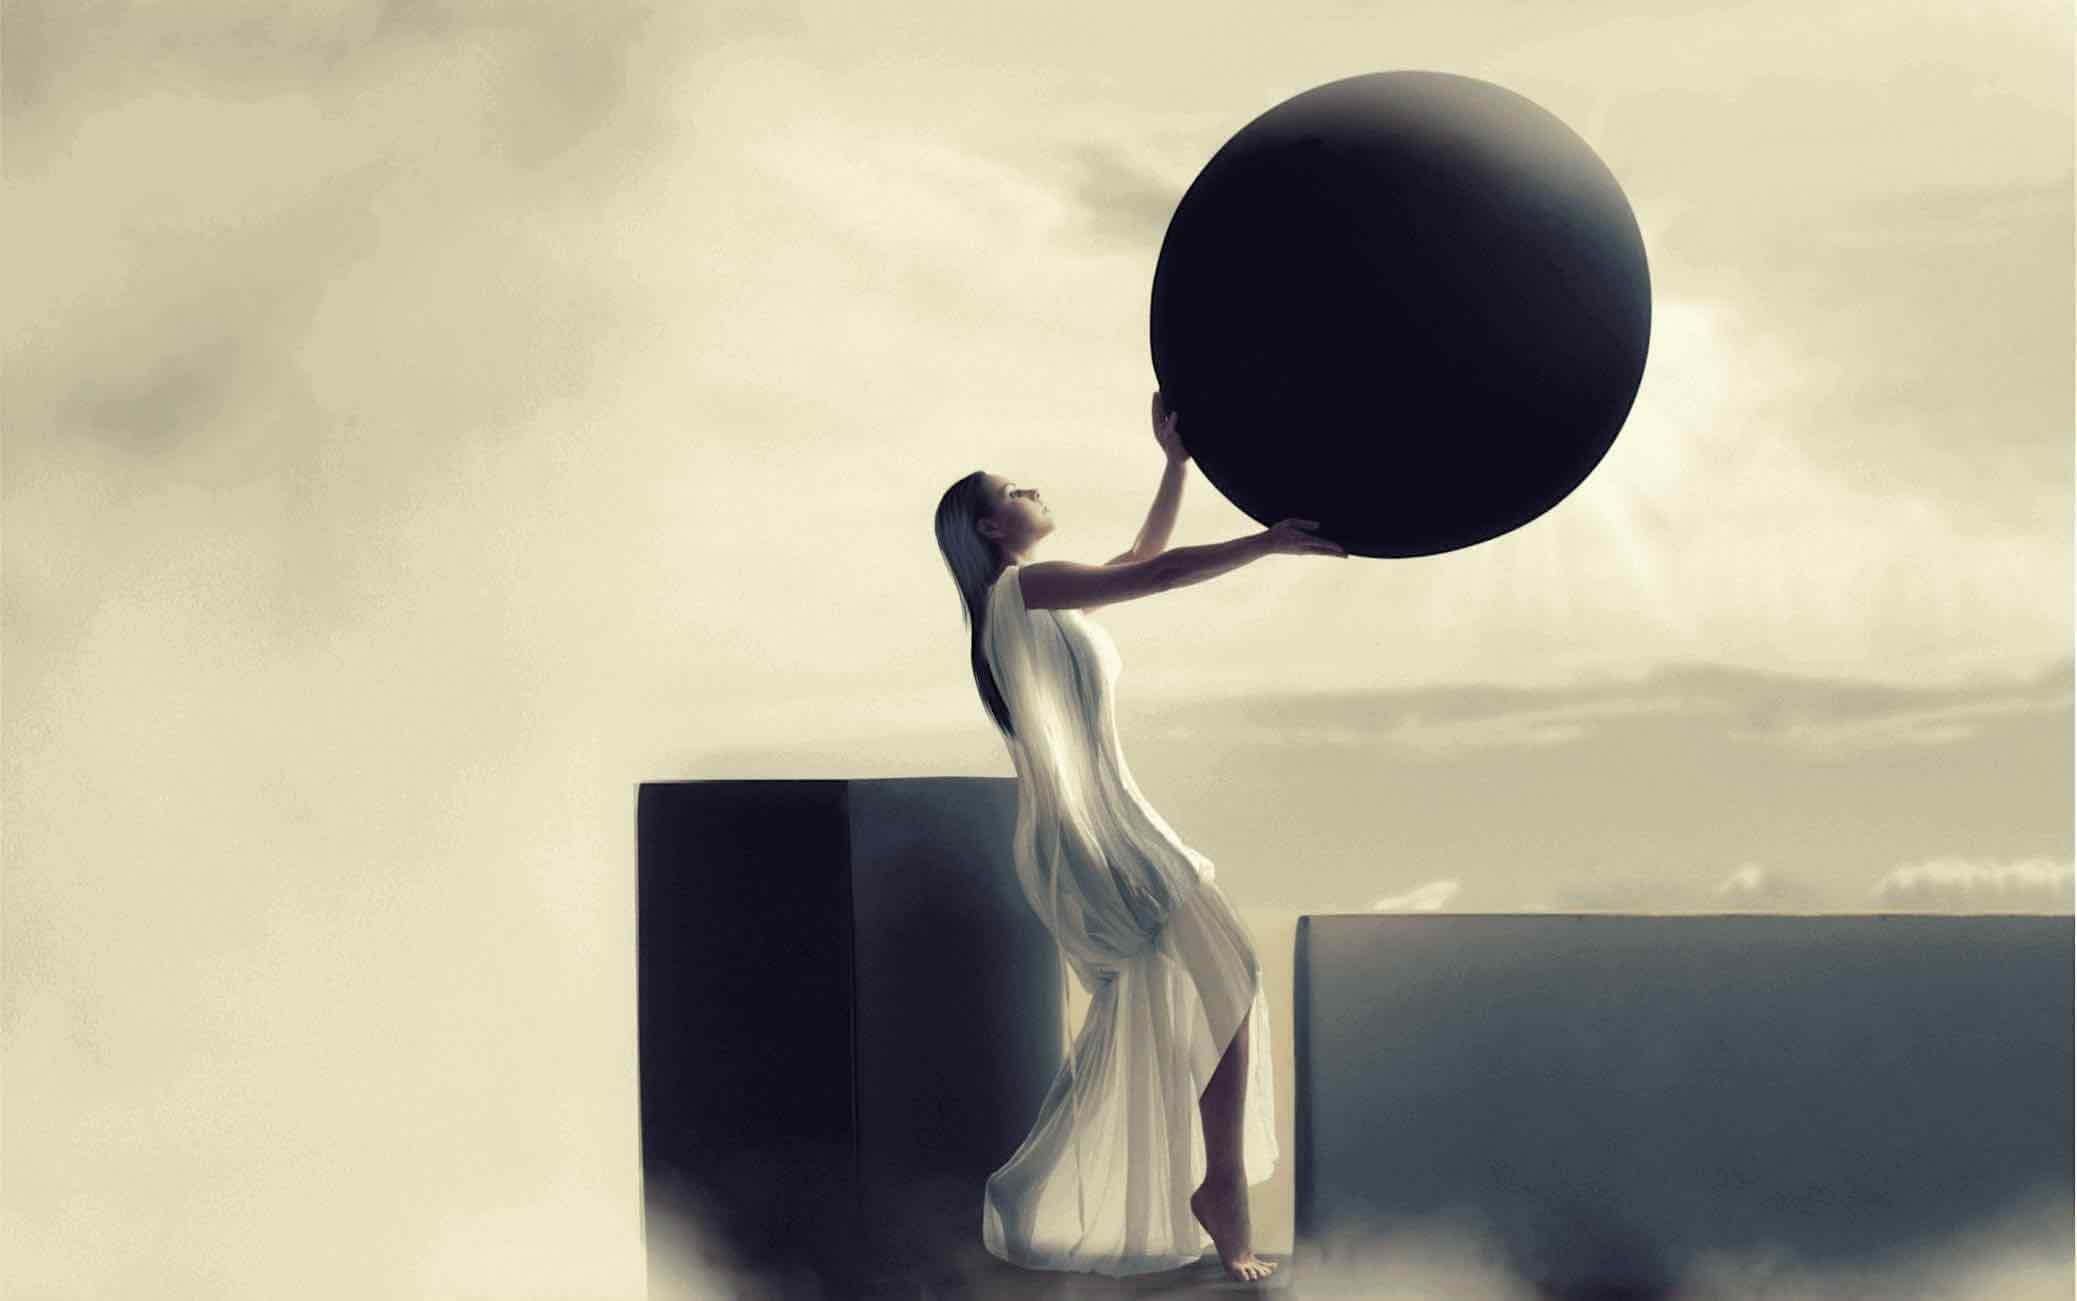 A fine art setting in evening skies showing a serene black haired woman in ancient white dress standing on a black monolith holding a dark sphere or disk as header image for a teaser article about The Destiny Book by Helena Lind